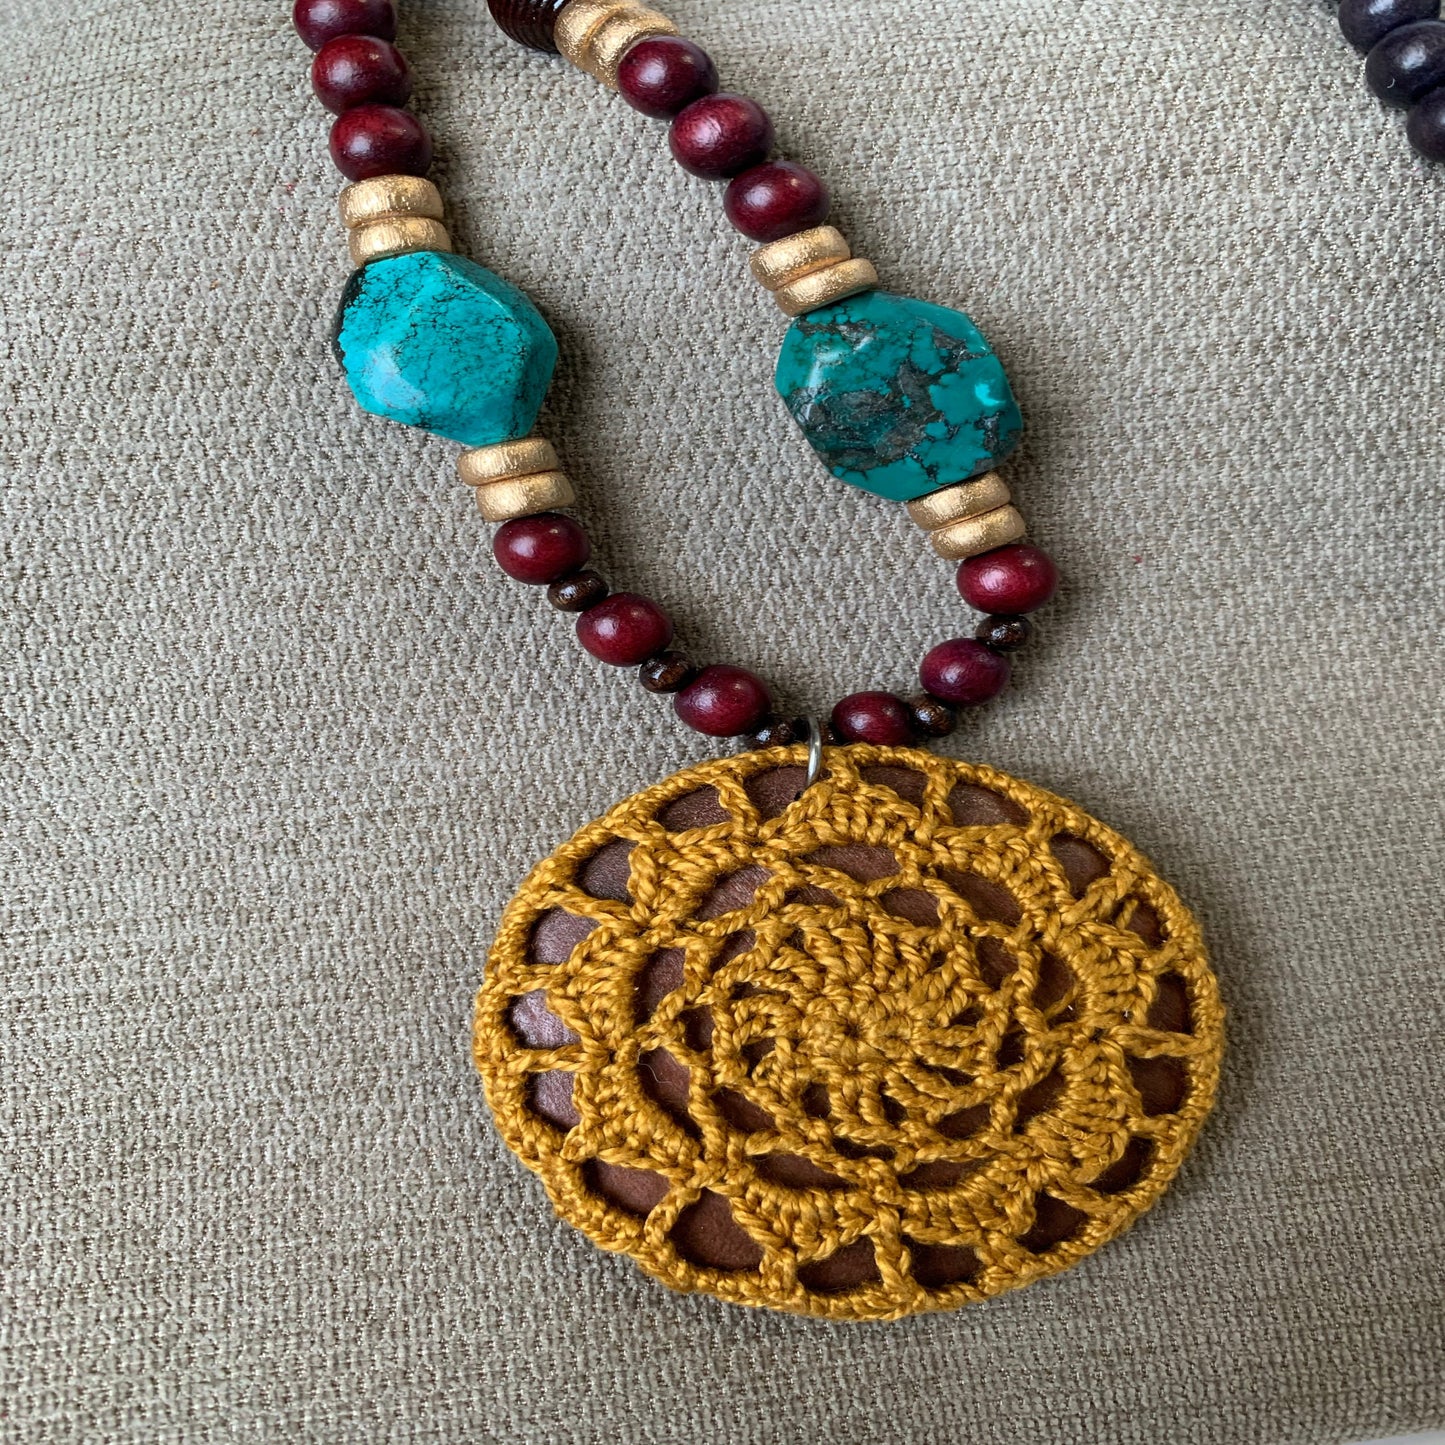 long wooden bead necklace with natural stones and gold crocheted pendant